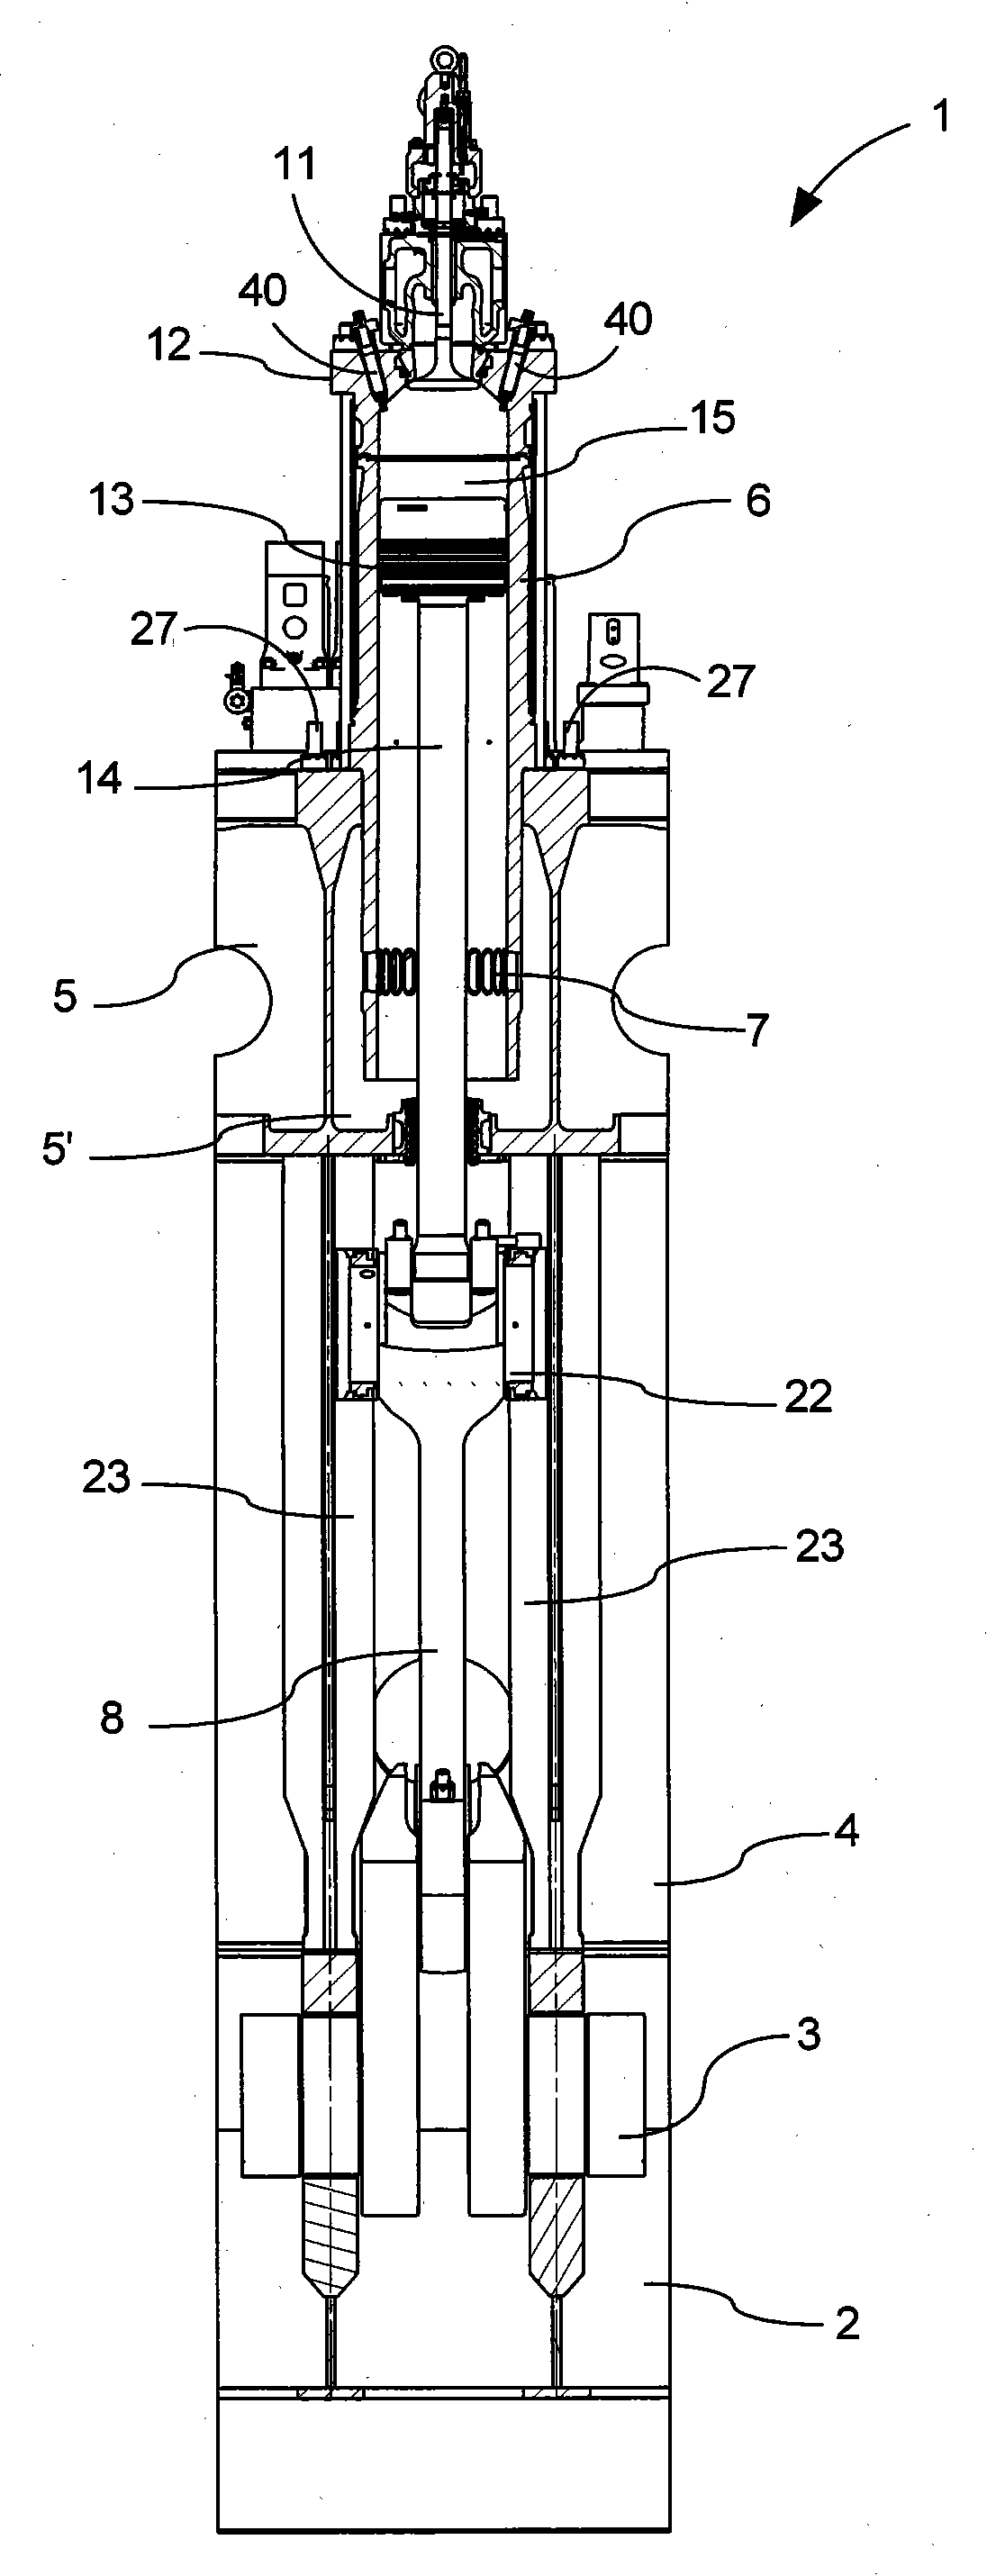 Large two-stroke diesel engine with electronically controlled exhaust valve actuation system